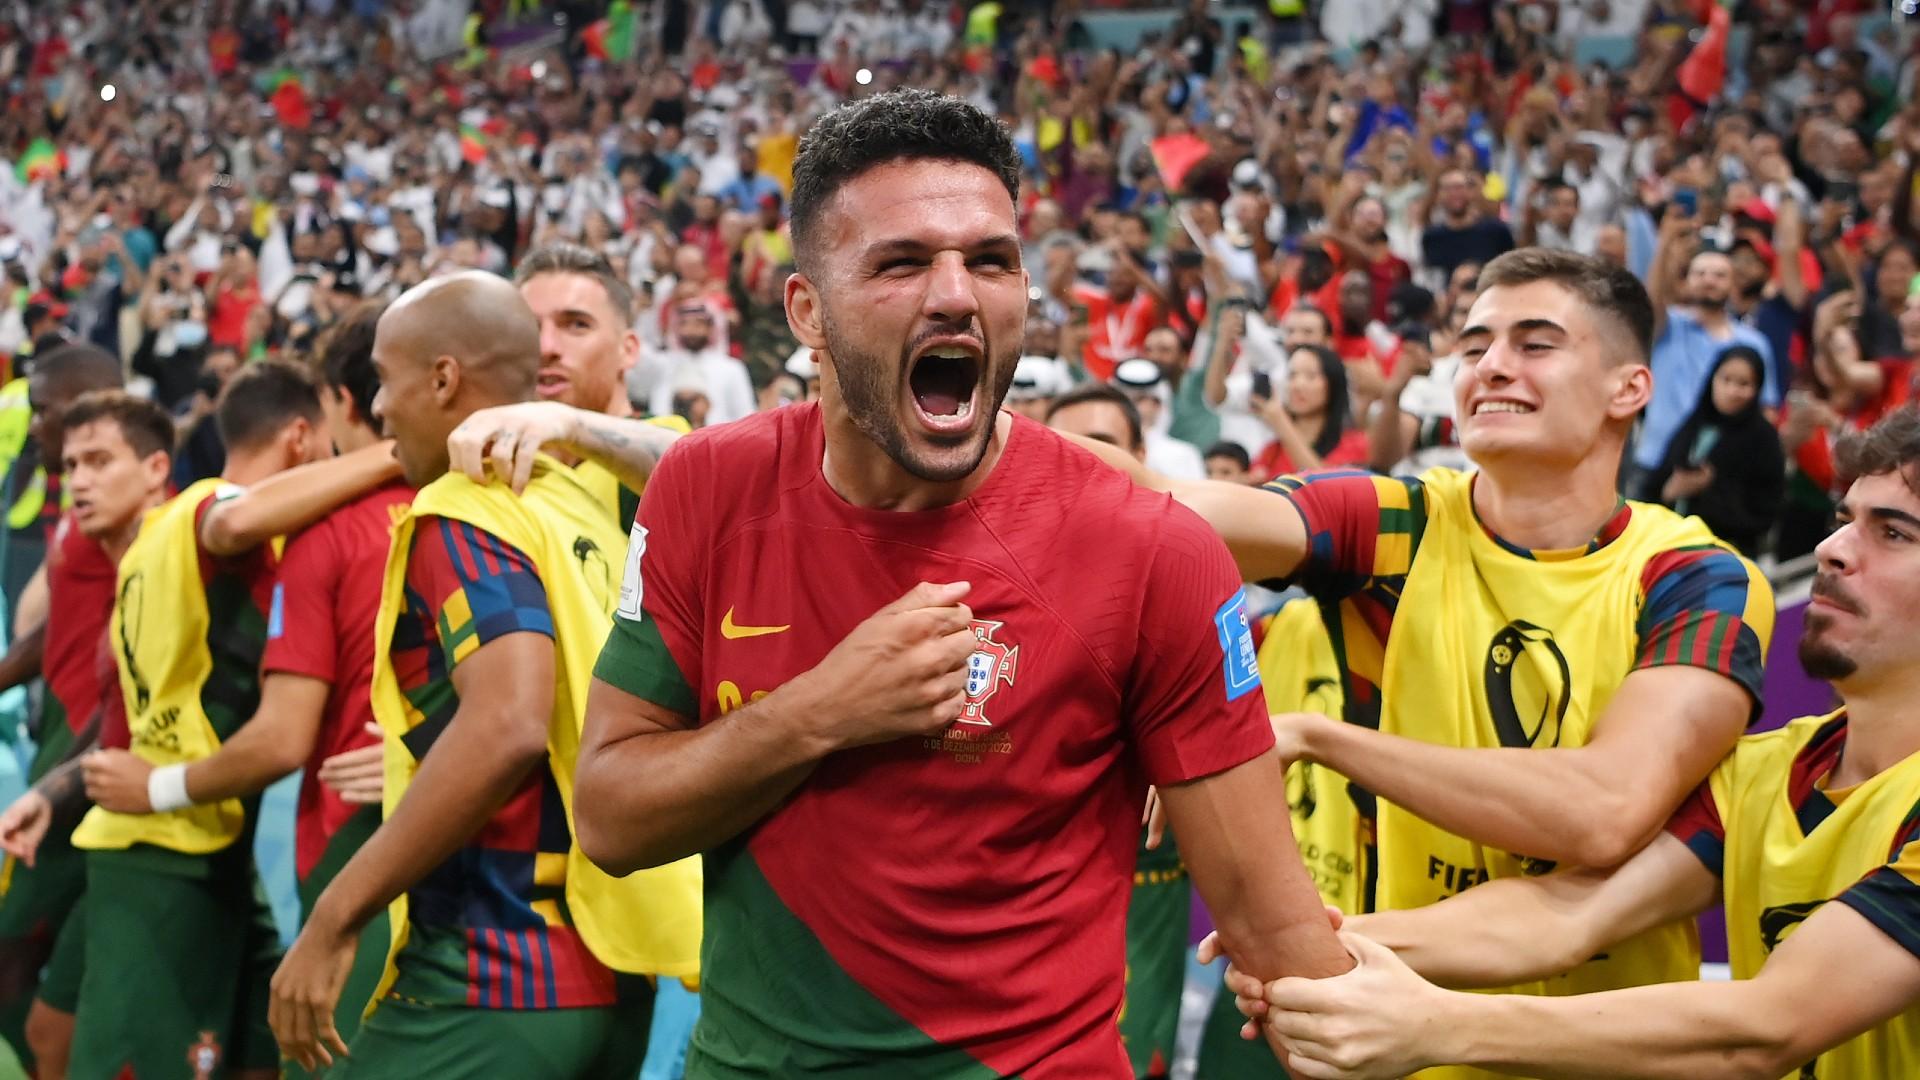 Hero of Portugal Goncalo Ramos 'I Never dreamed' Of World Cup Hat-trick